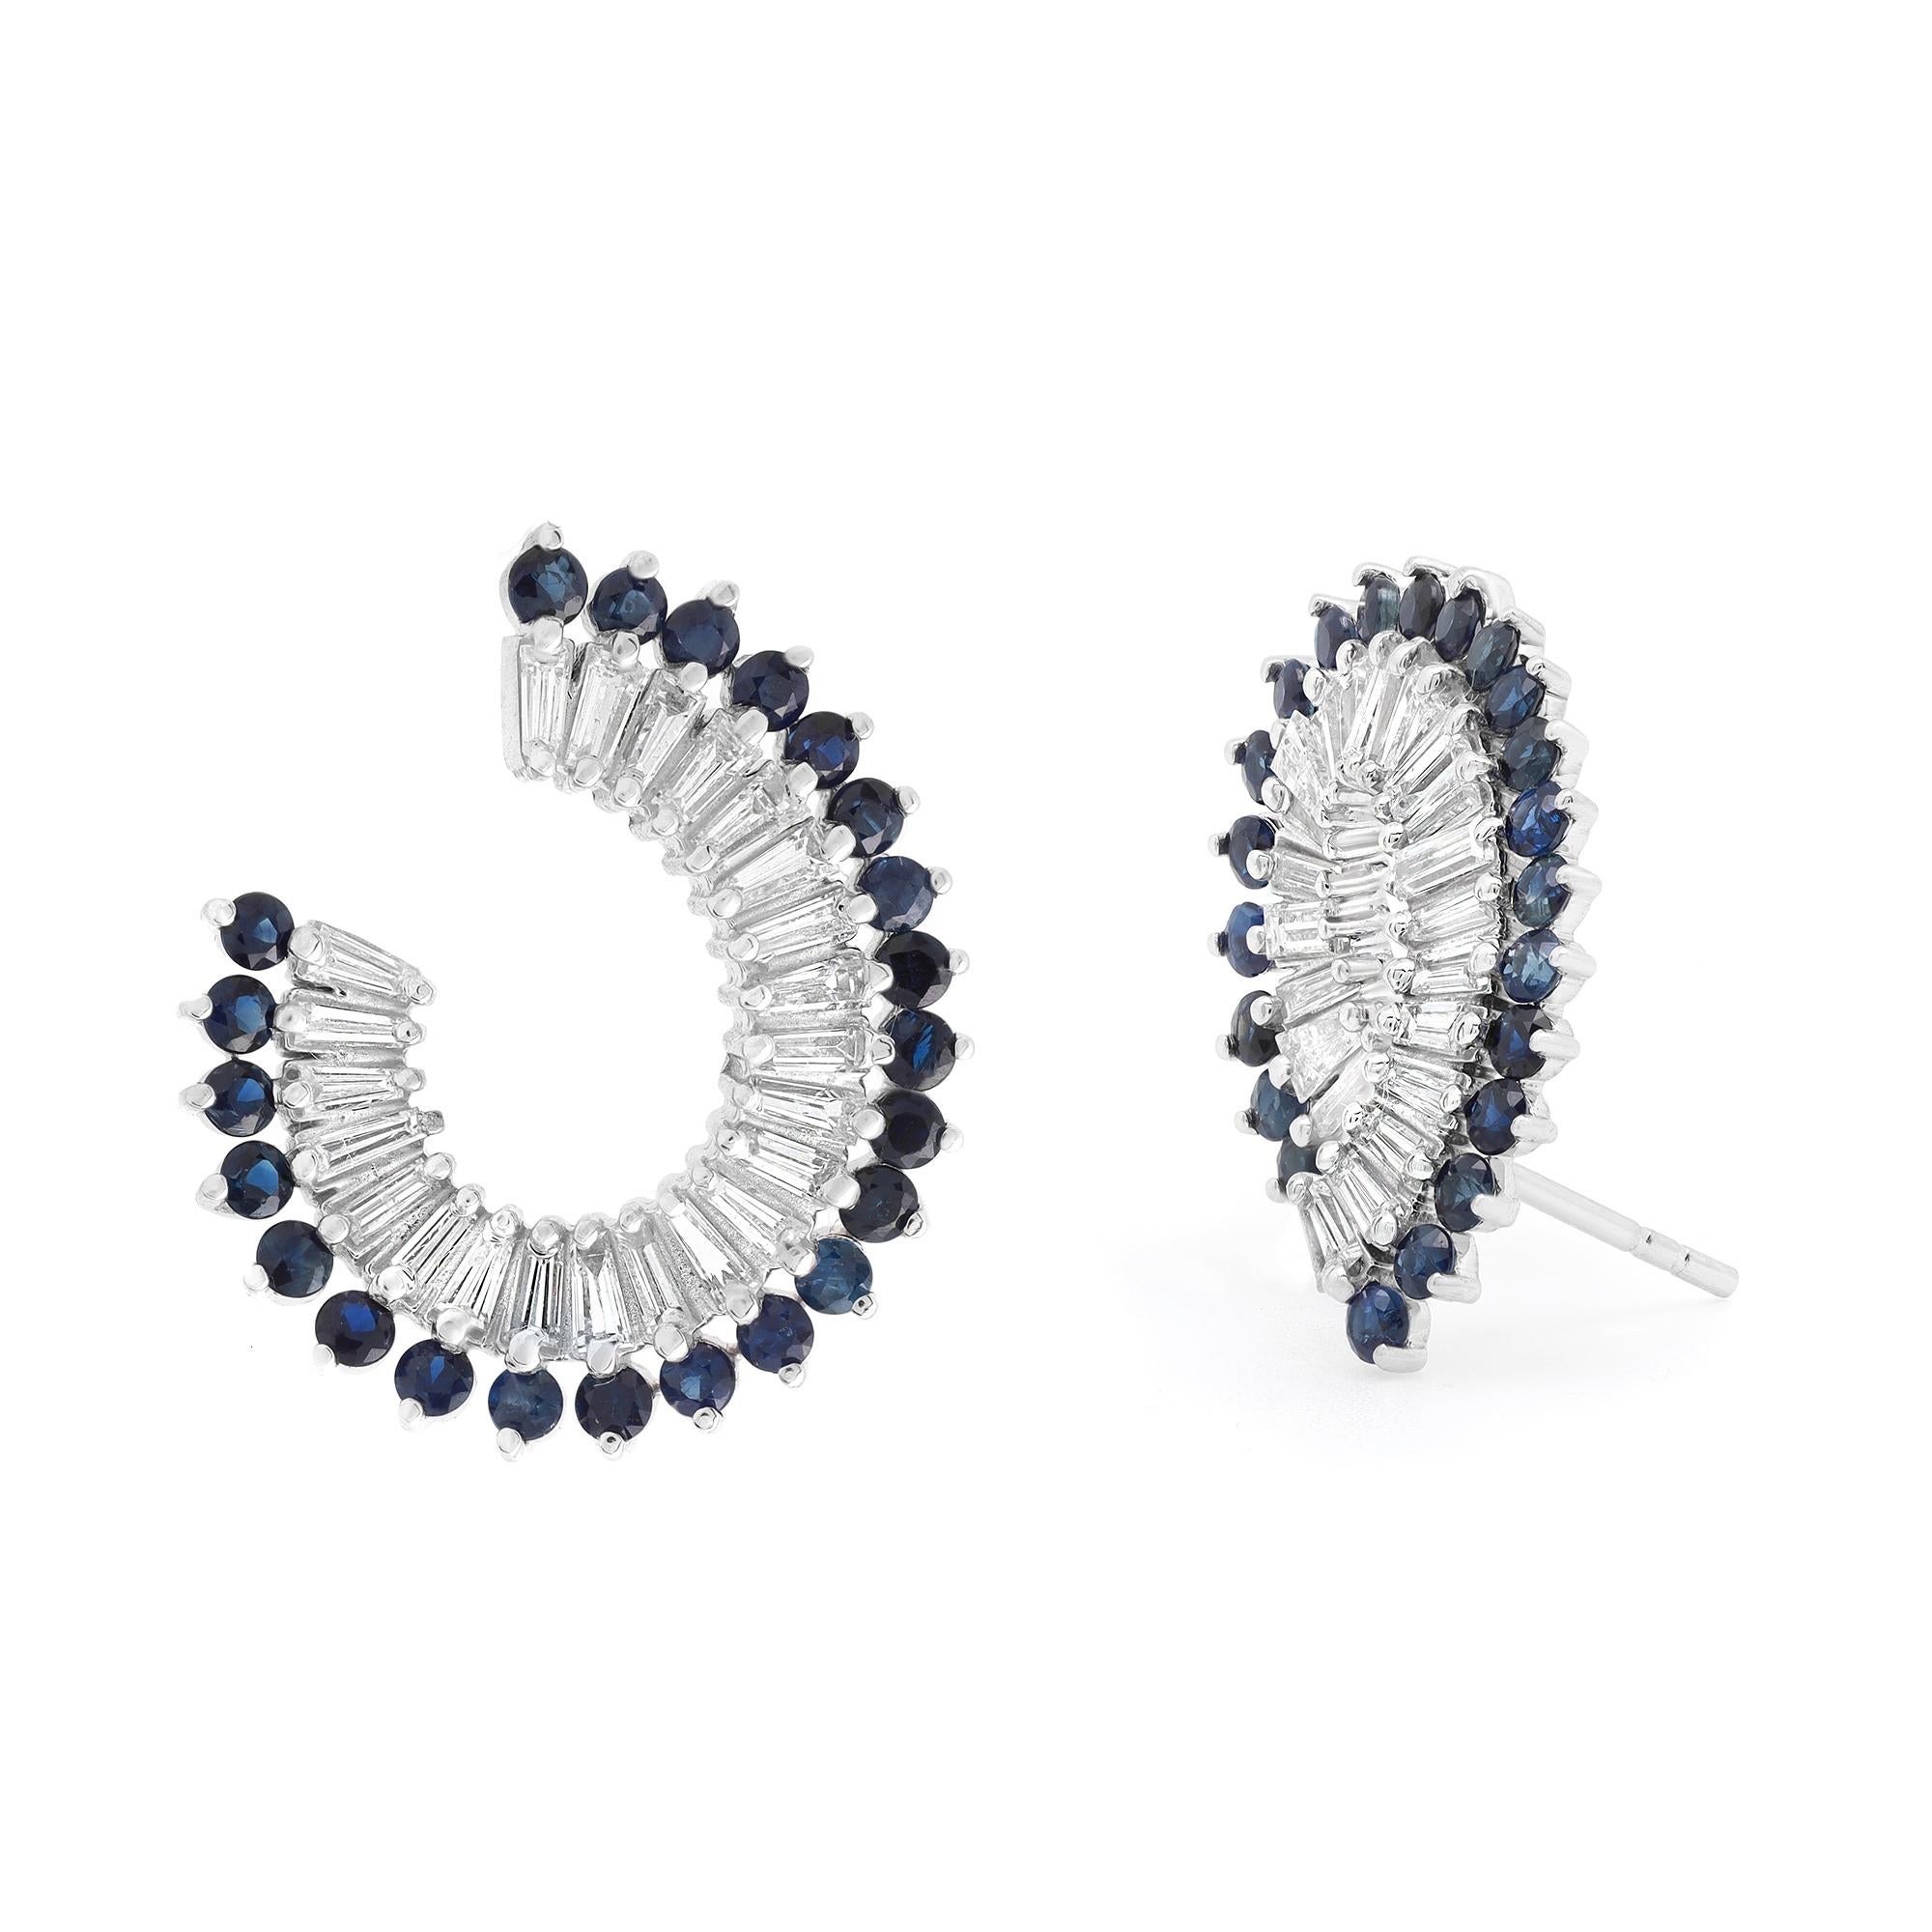 Elevate any attire with these dazzling earrings which is crafted in fine 14K white gold. These earrings feature prong set Baguette cut diamonds weighing 1.68 carats with round cut Blue Sapphires weighing 1.91 carats. Diamond quality: color G-H and